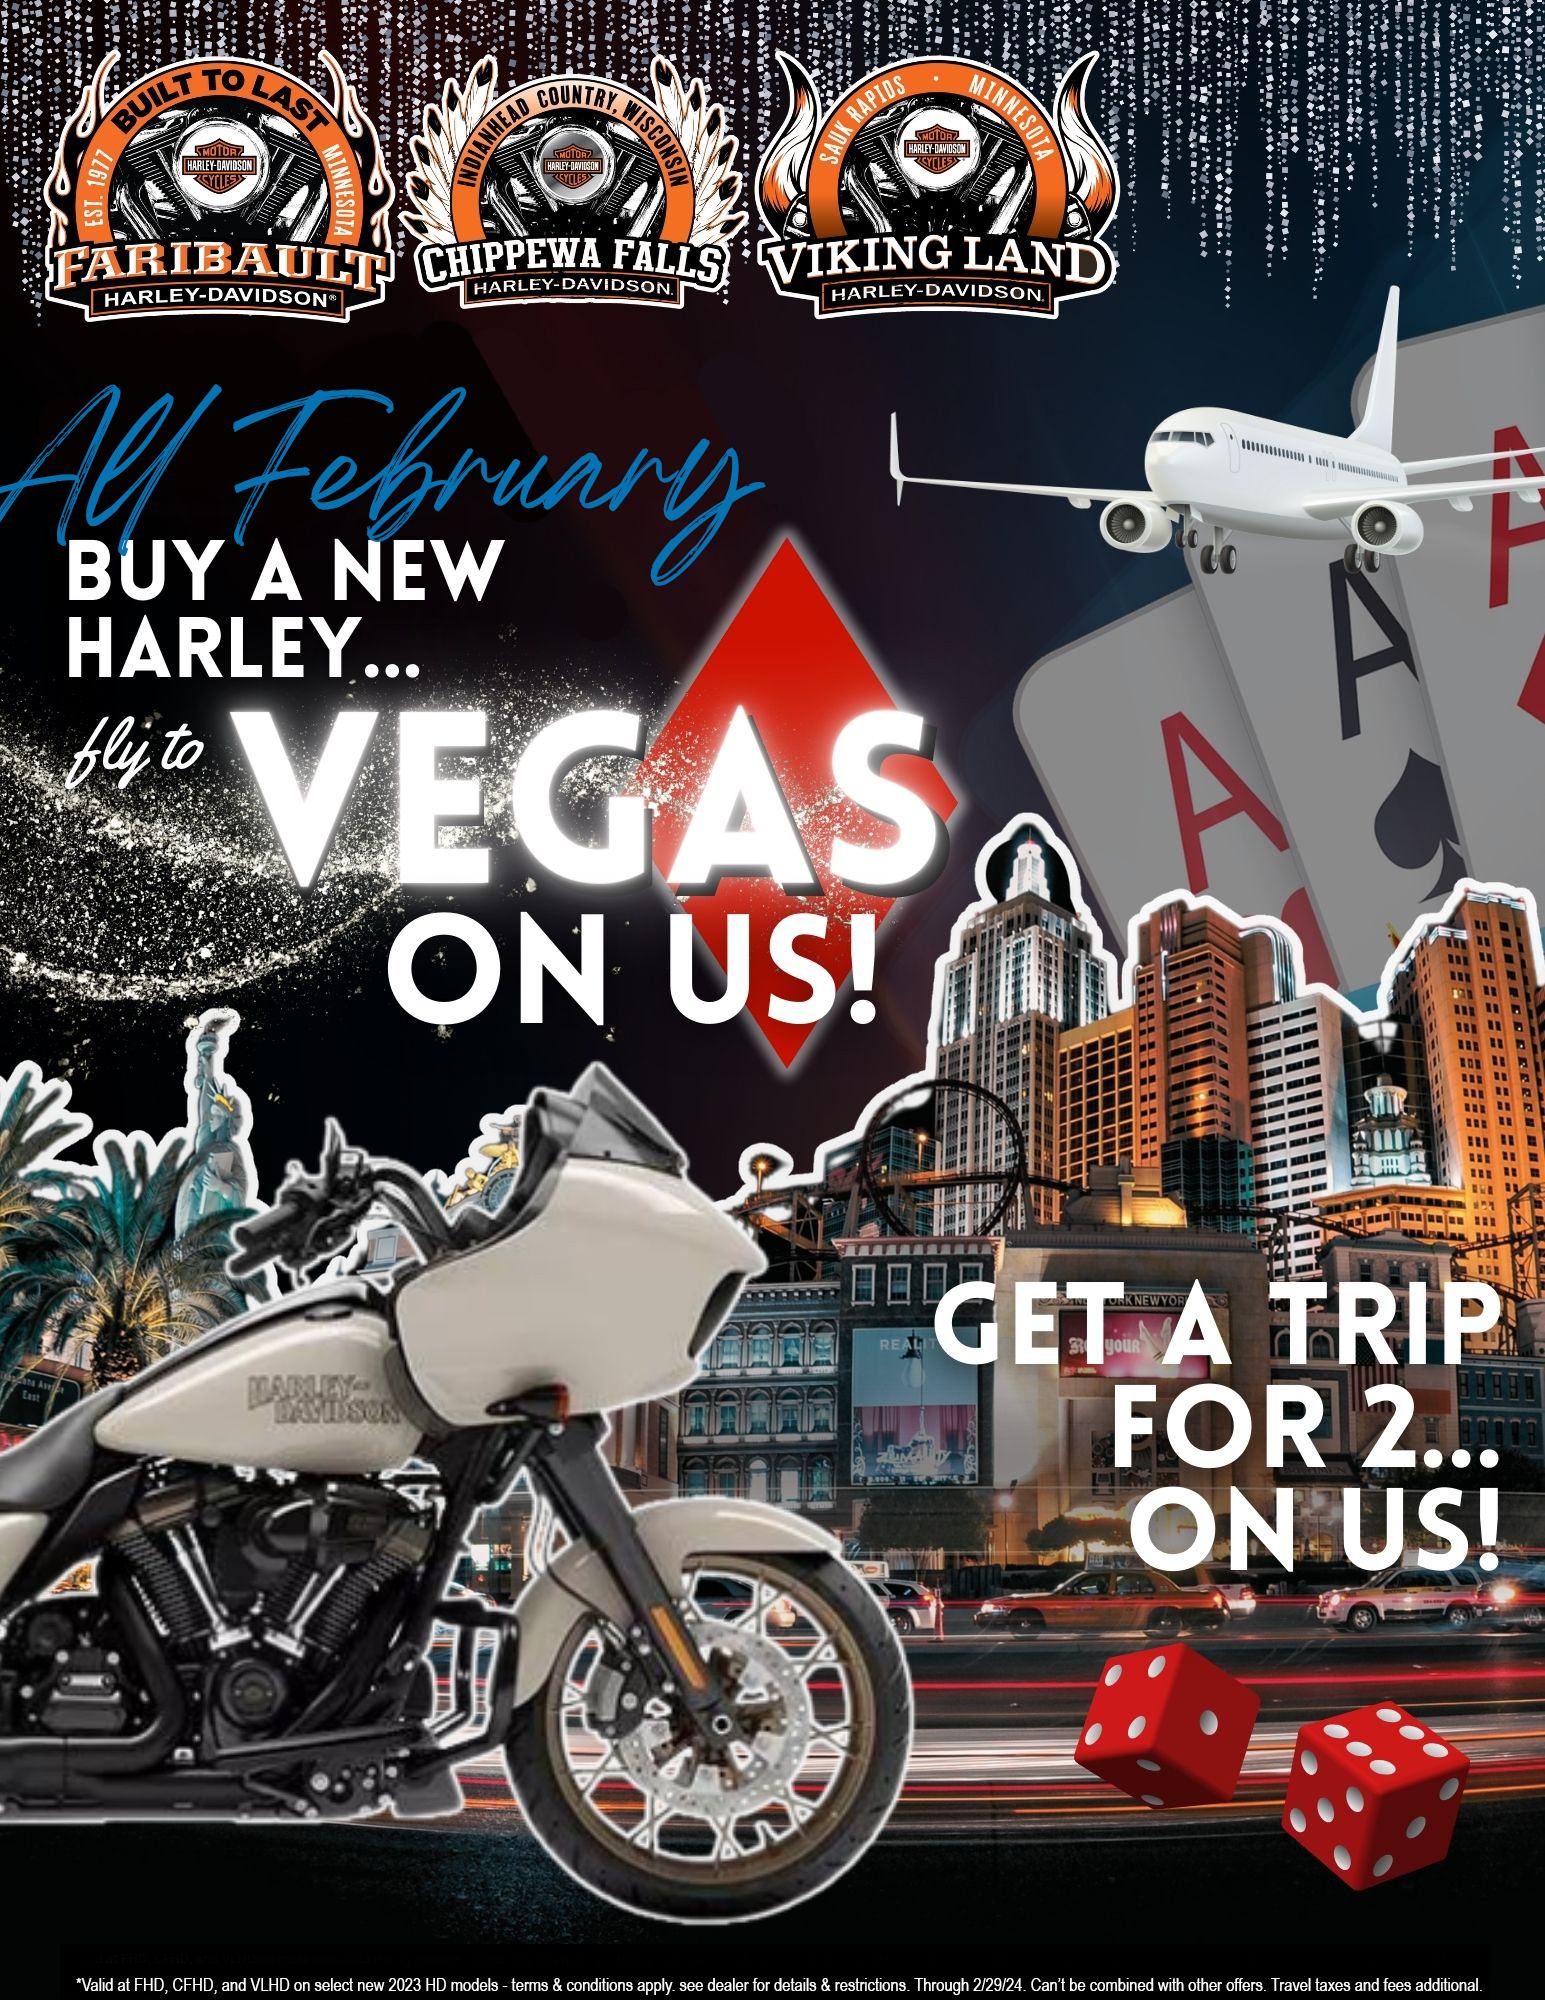 Get a free trip to vegas when you buy a new bike from Faribault Harley-Davidson this February 2024